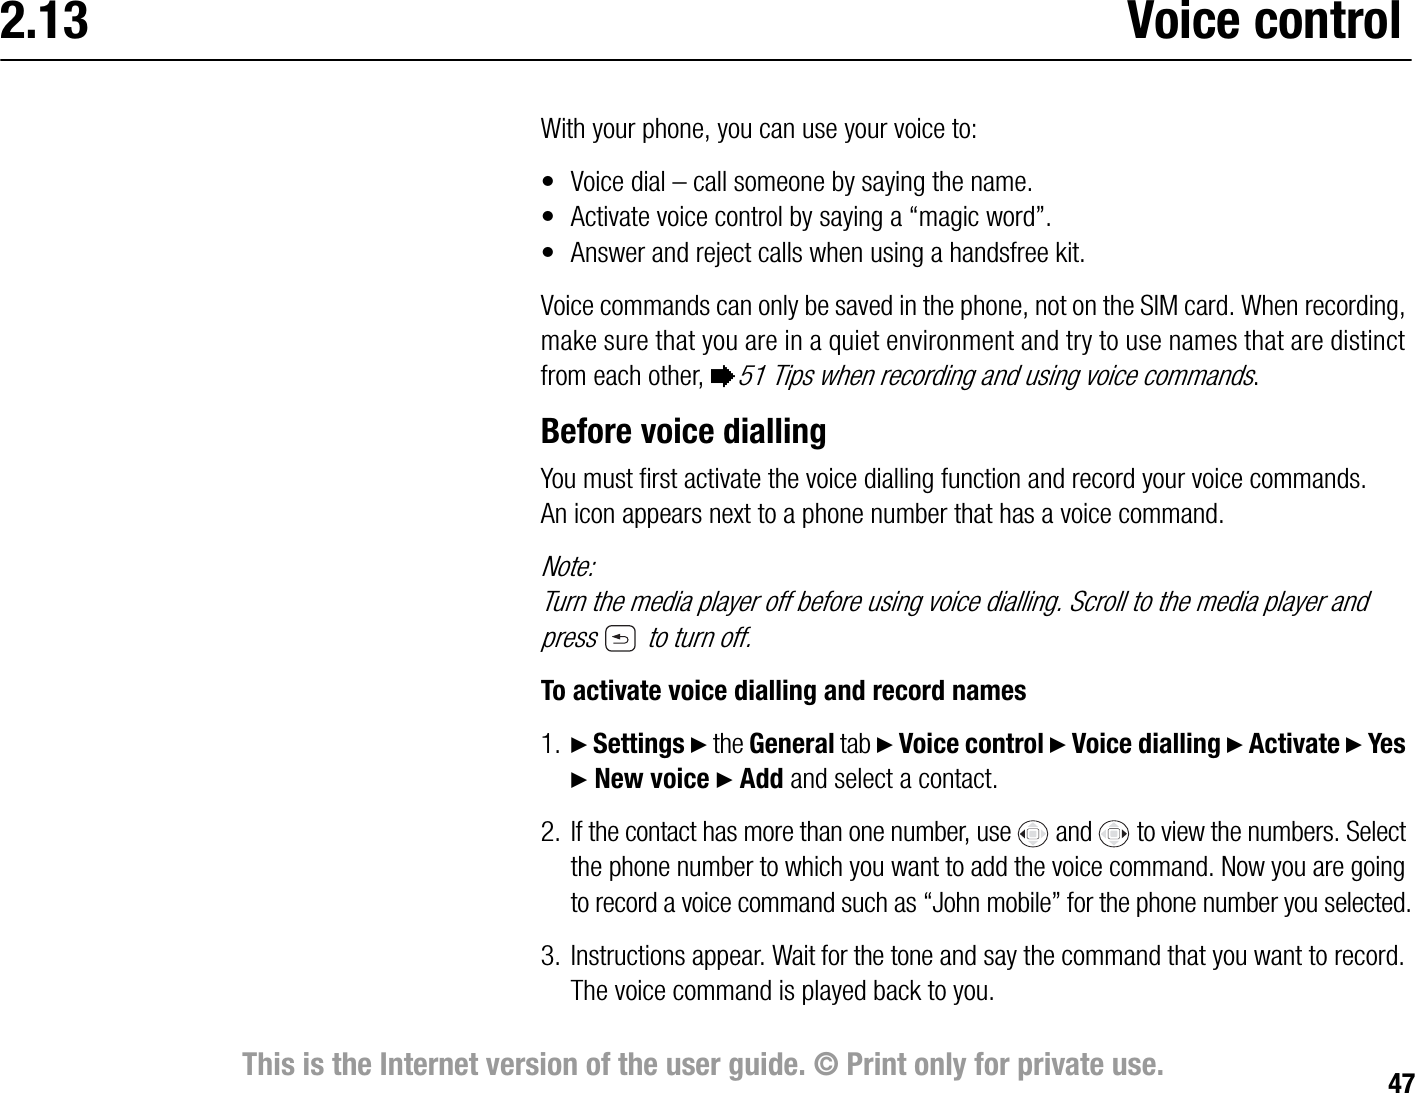 47This is the Internet version of the user guide. © Print only for private use.2.13 Voice controlWith your phone, you can use your voice to:• Voice dial – call someone by saying the name.• Activate voice control by saying a “magic word”.• Answer and reject calls when using a handsfree kit.Voice commands can only be saved in the phone, not on the SIM card. When recording, make sure that you are in a quiet environment and try to use names that are distinct from each other, %51 Tips when recording and using voice commands.Before voice diallingYou must first activate the voice dialling function and record your voice commands. An icon appears next to a phone number that has a voice command.Note:Turn the media player off before using voice dialling. Scroll to the media player and press   to turn off.To activate voice dialling and record names1. } Settings } the General tab } Voice control } Voice dialling } Activate } Yes } New voice } Add and select a contact.2. If the contact has more than one number, use   and   to view the numbers. Select the phone number to which you want to add the voice command. Now you are going to record a voice command such as “John mobile” for the phone number you selected.3. Instructions appear. Wait for the tone and say the command that you want to record. The voice command is played back to you.